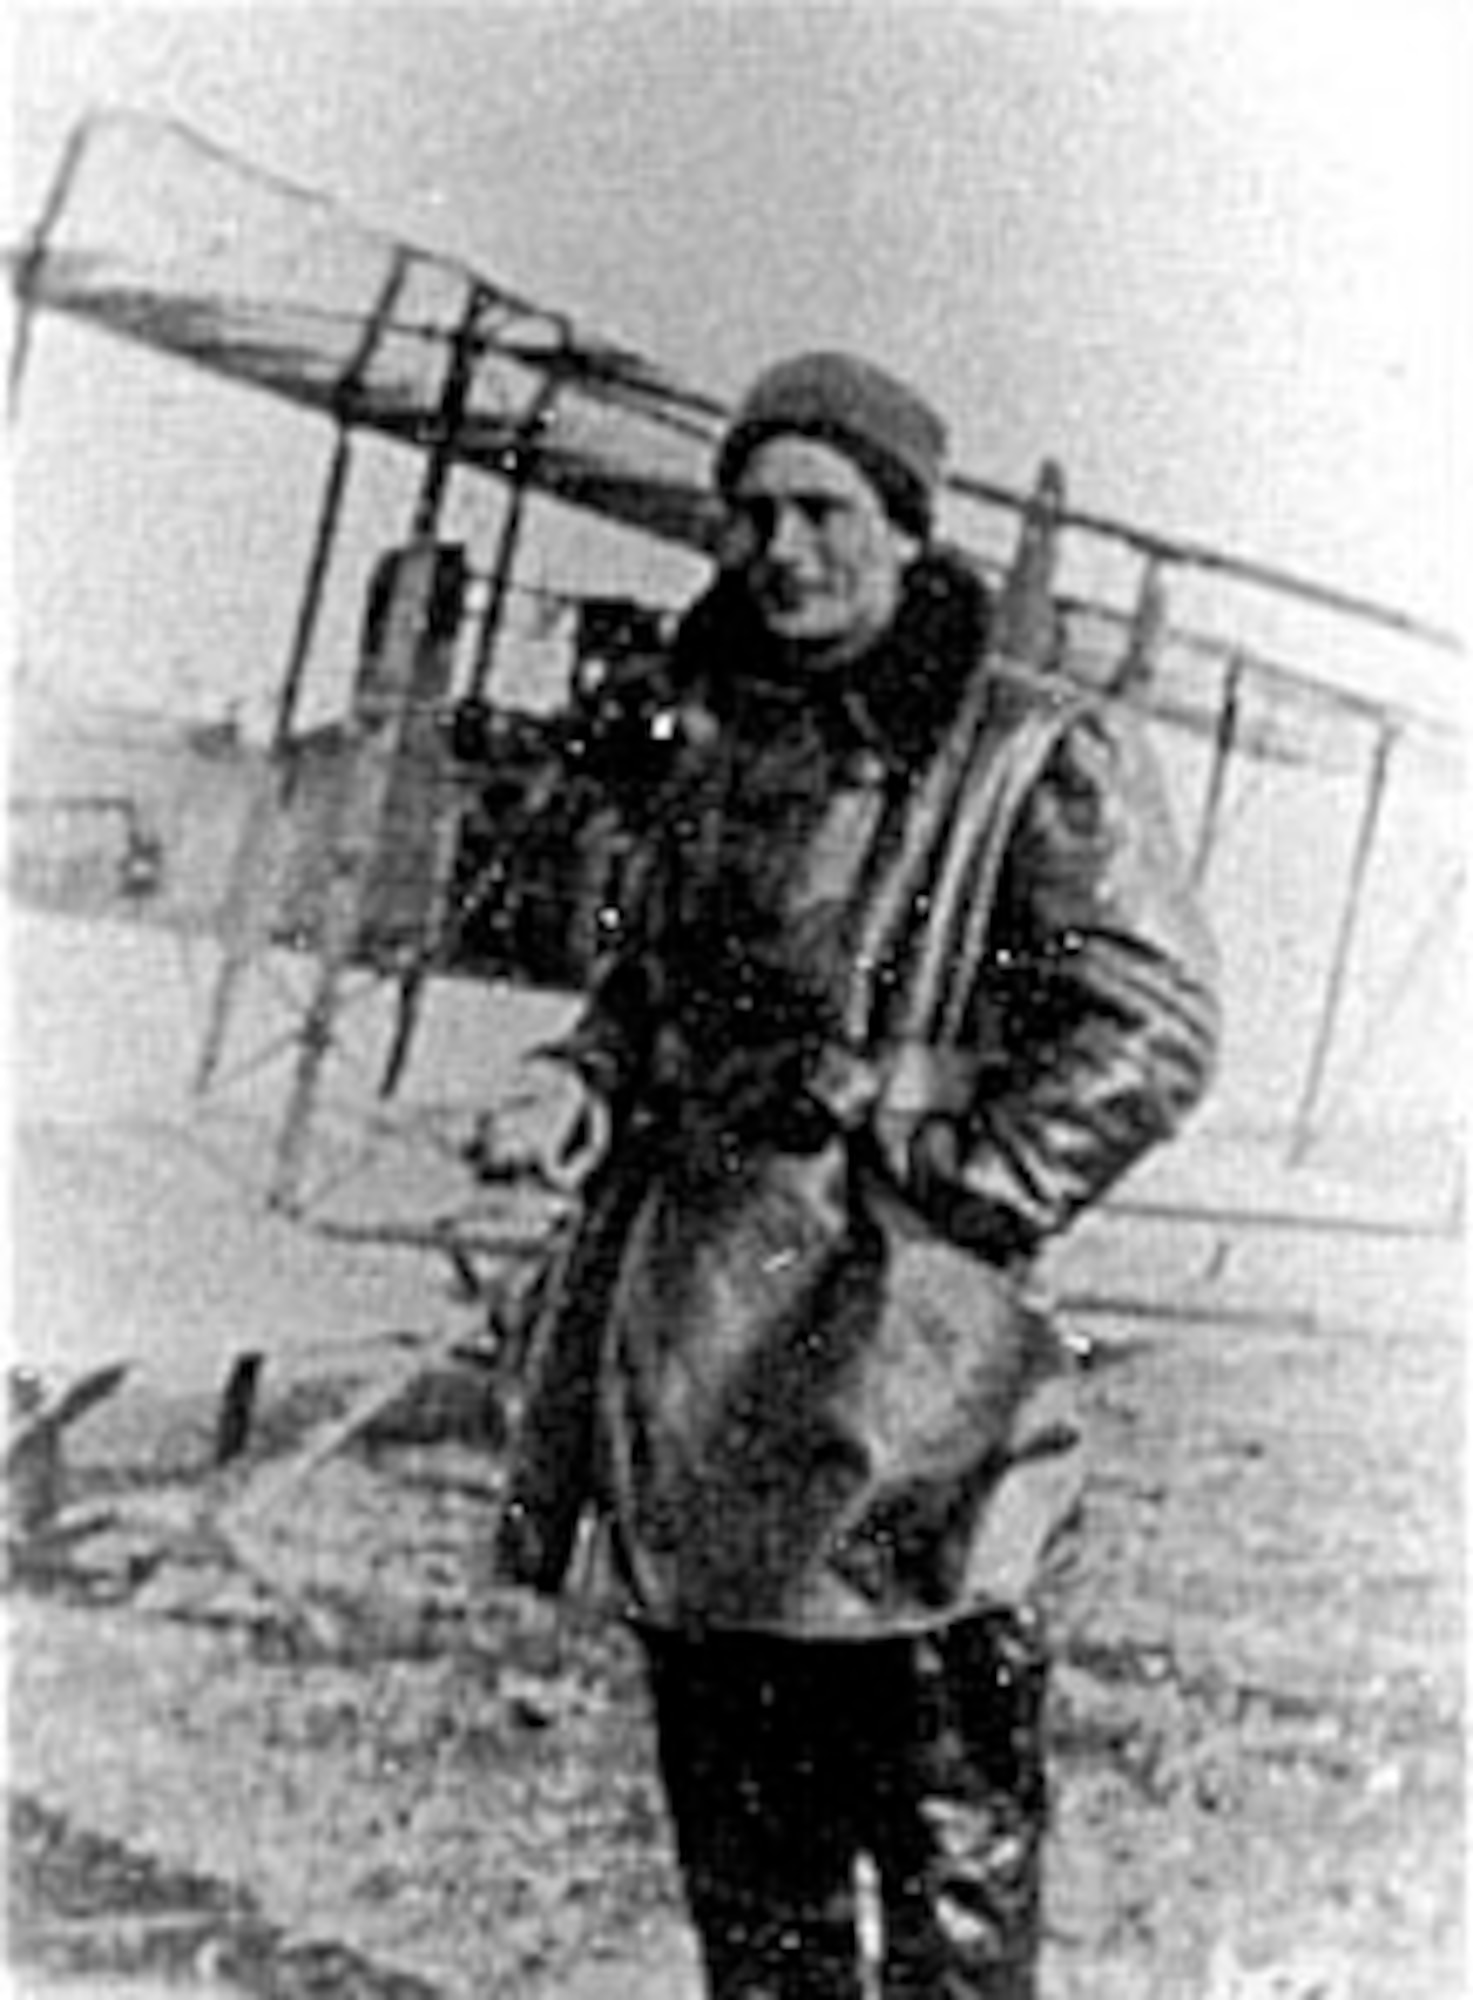 Lt. Harold R. Harris poses by a Maurice Farman training biplane in his winter flying attire. In later years, Lt. Harris employed his heavy aircraft experience as a test pilot for the 1922 Barling Bomber at Wright Field, Ohio. (U.S. Air Force photo)